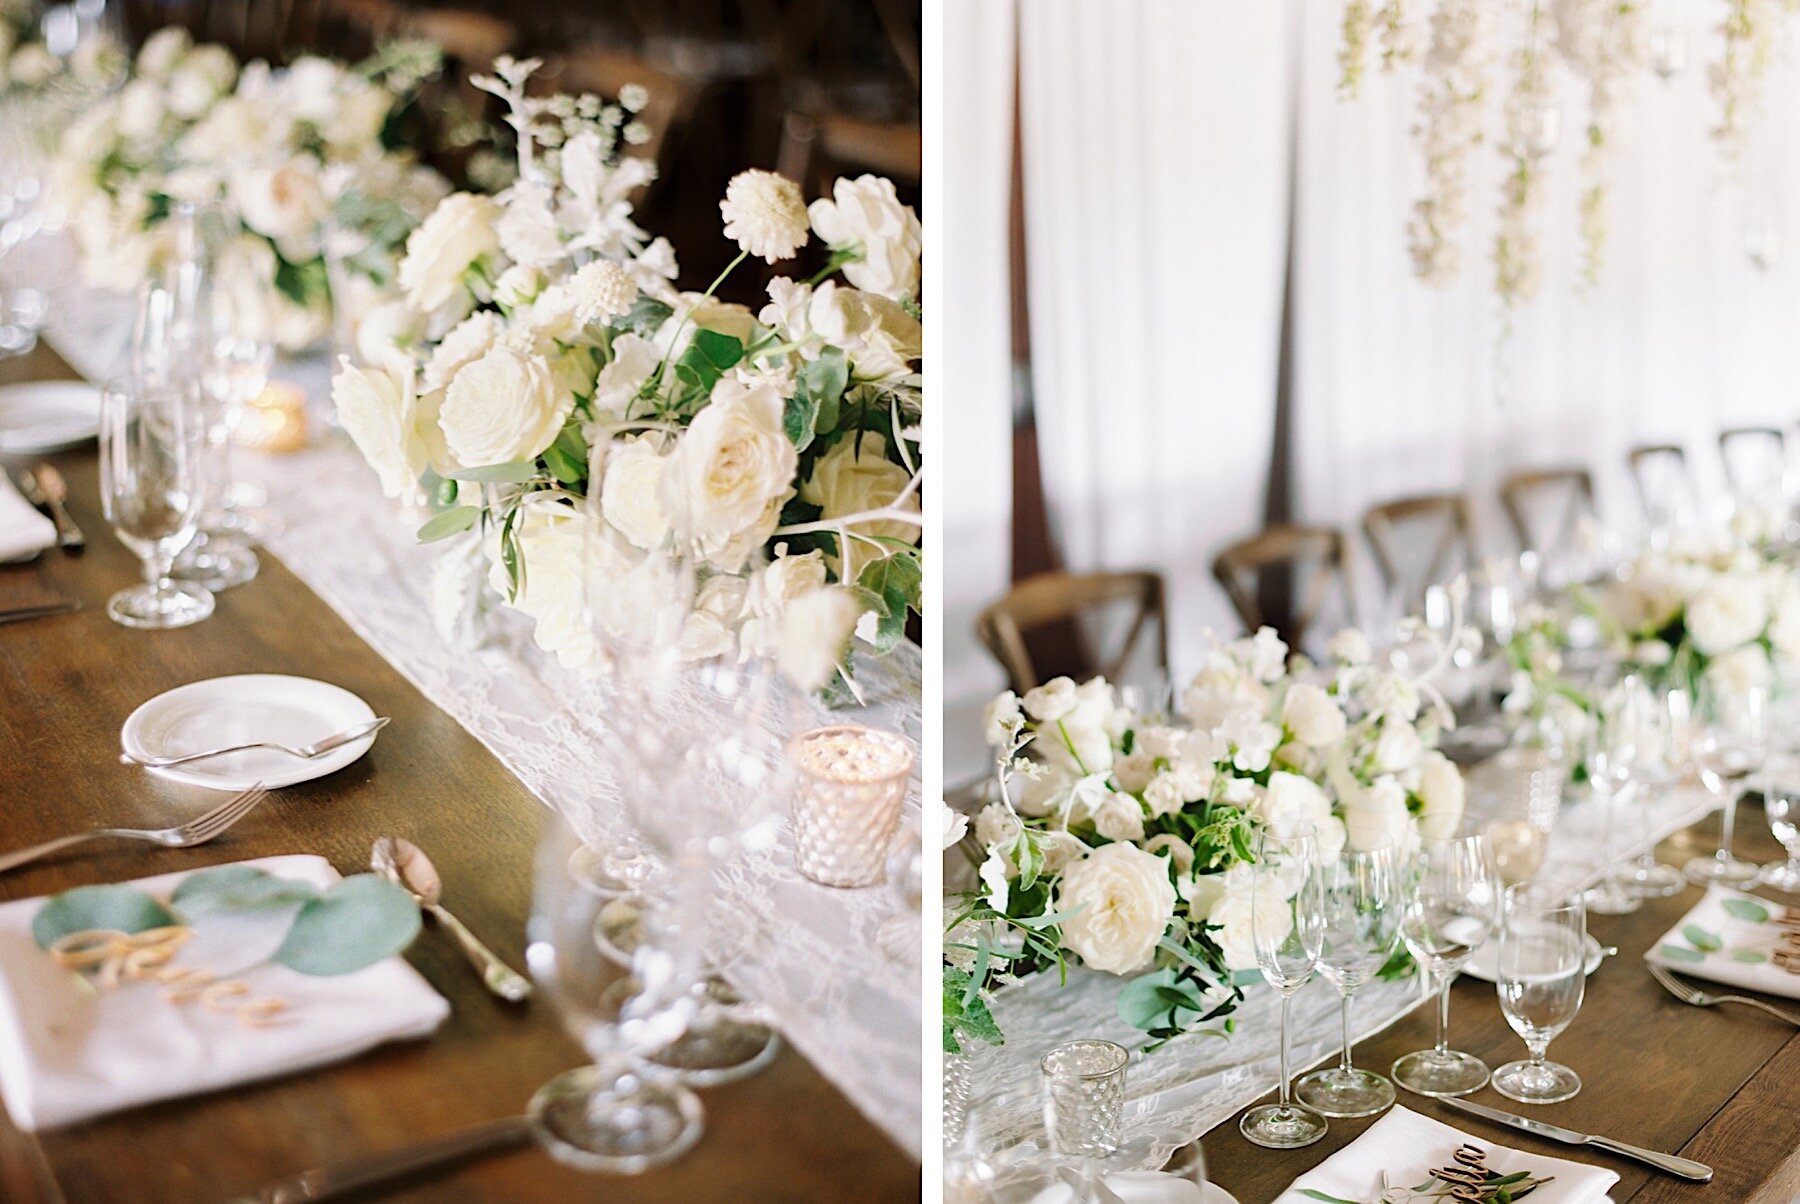 14_top_White_Lodge_luxury_green_Company_by_at_Design_and_Seattle_florist_Gather_wedding_Willows.jpg